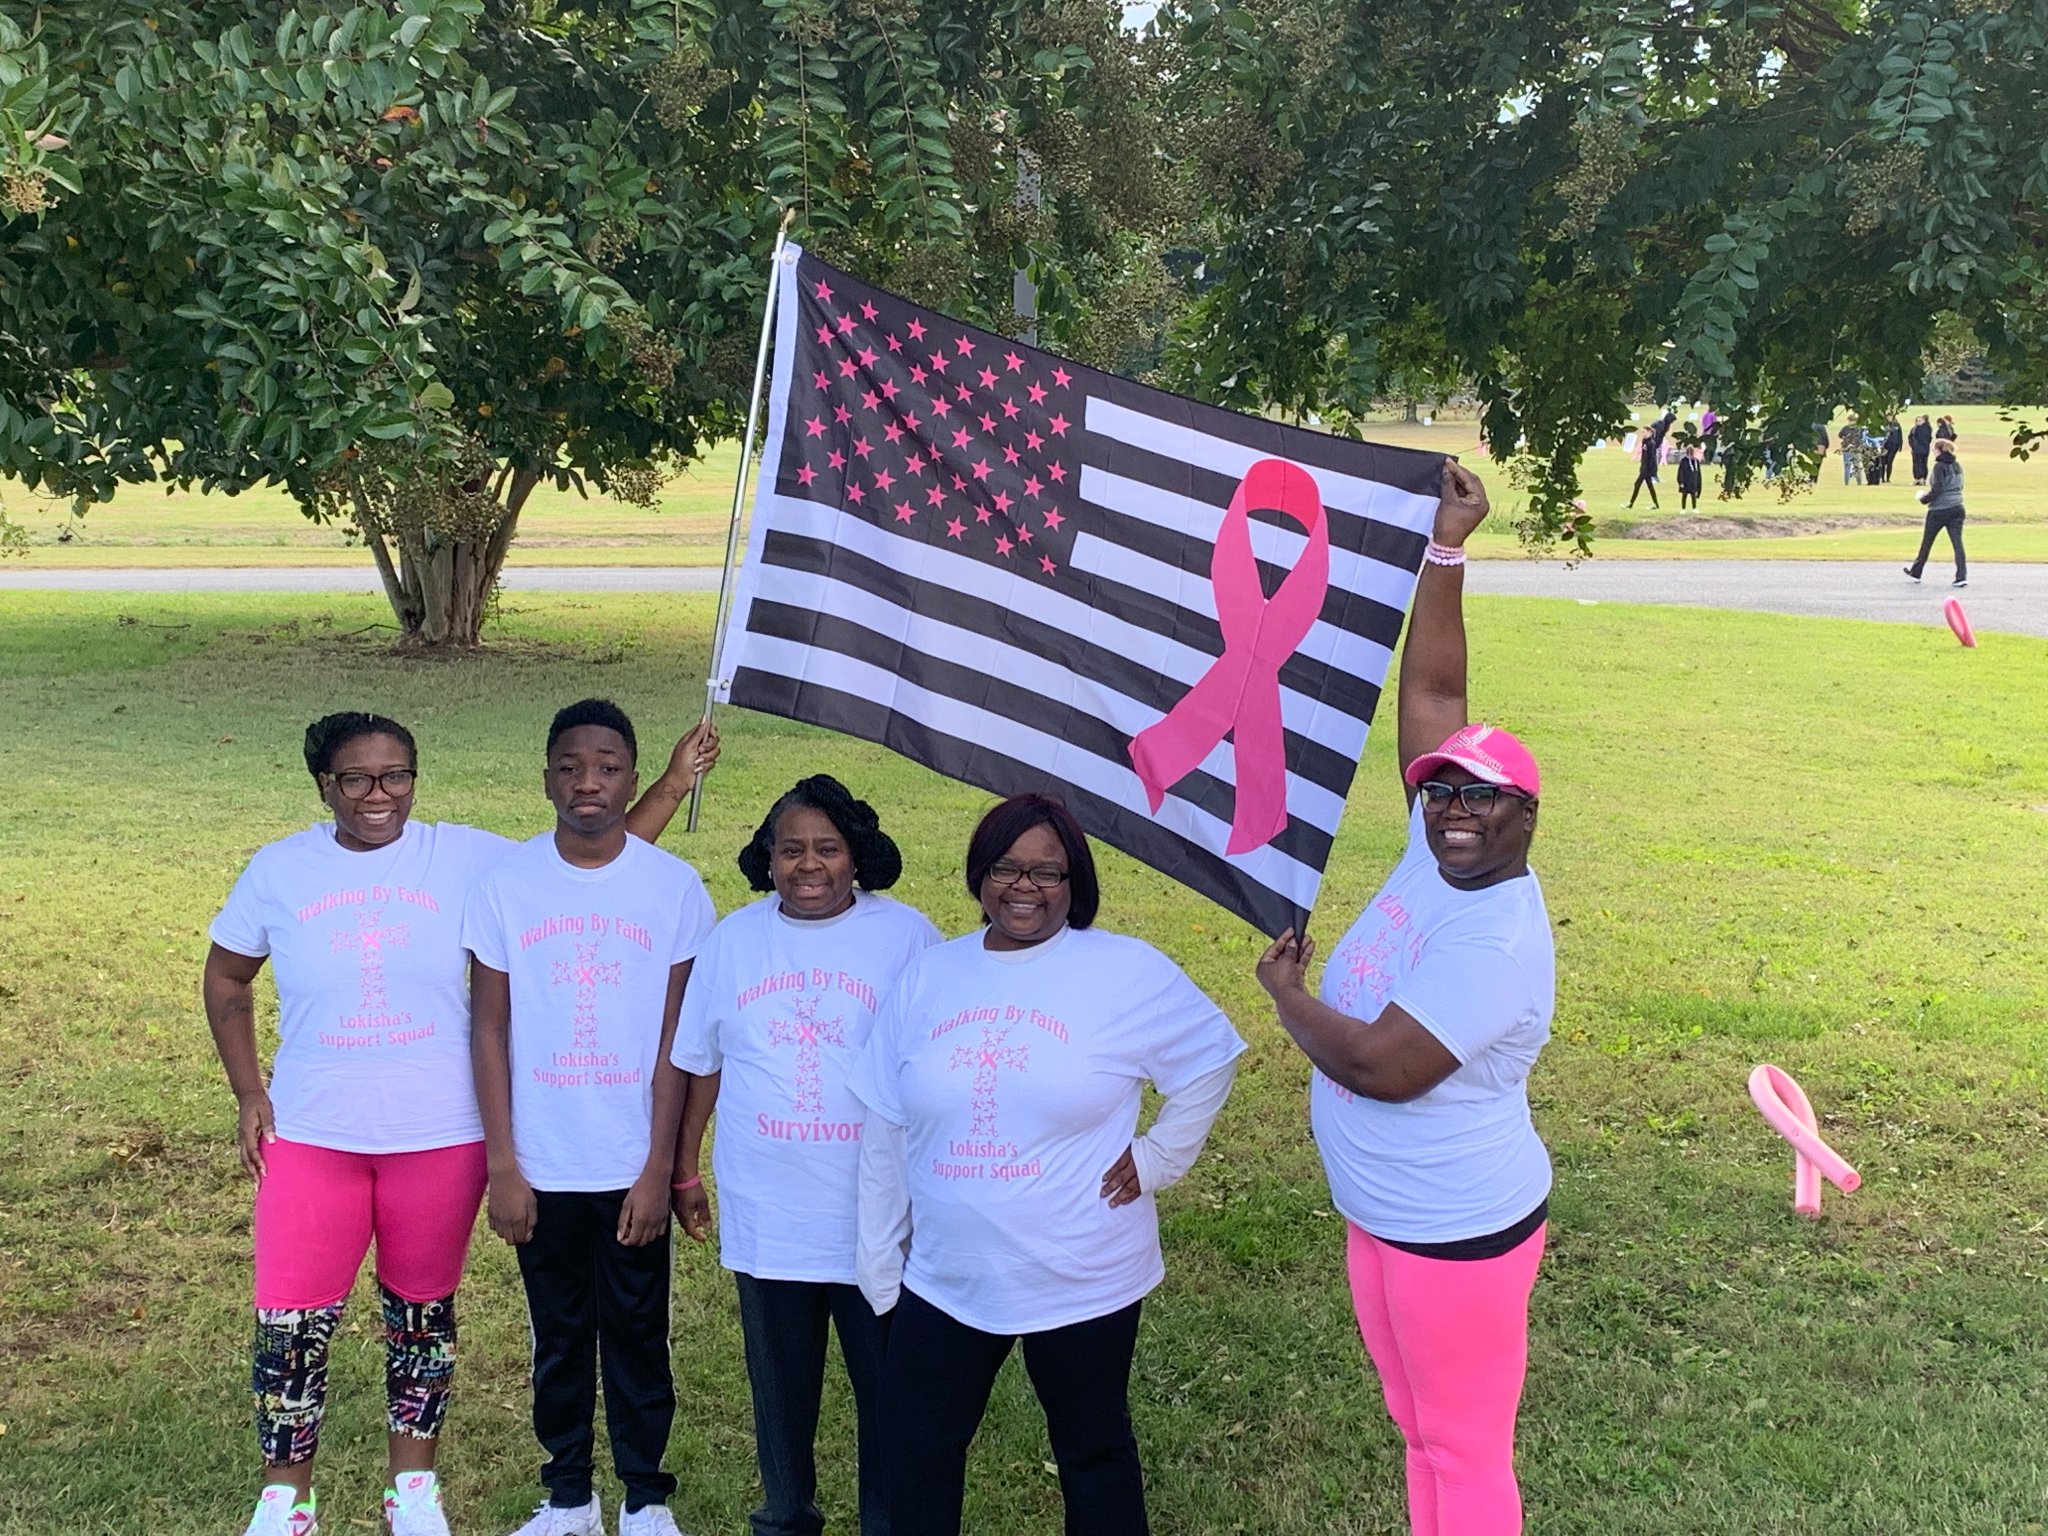 a group of people holding up a pink ribbon and an american flag